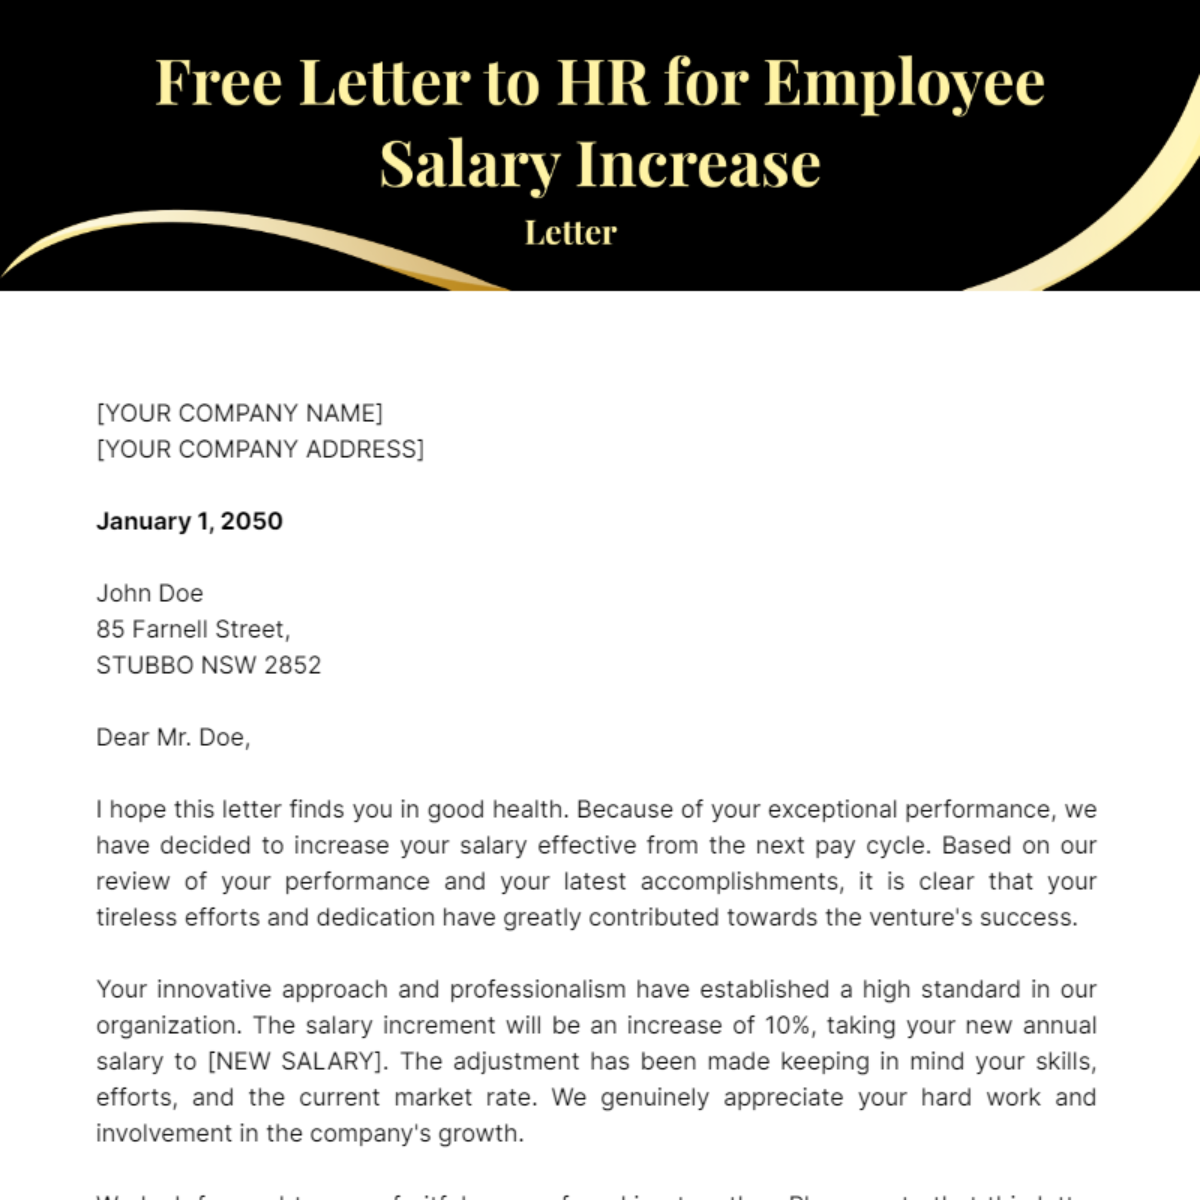 Letter to HR for Employee Salary Increase Template